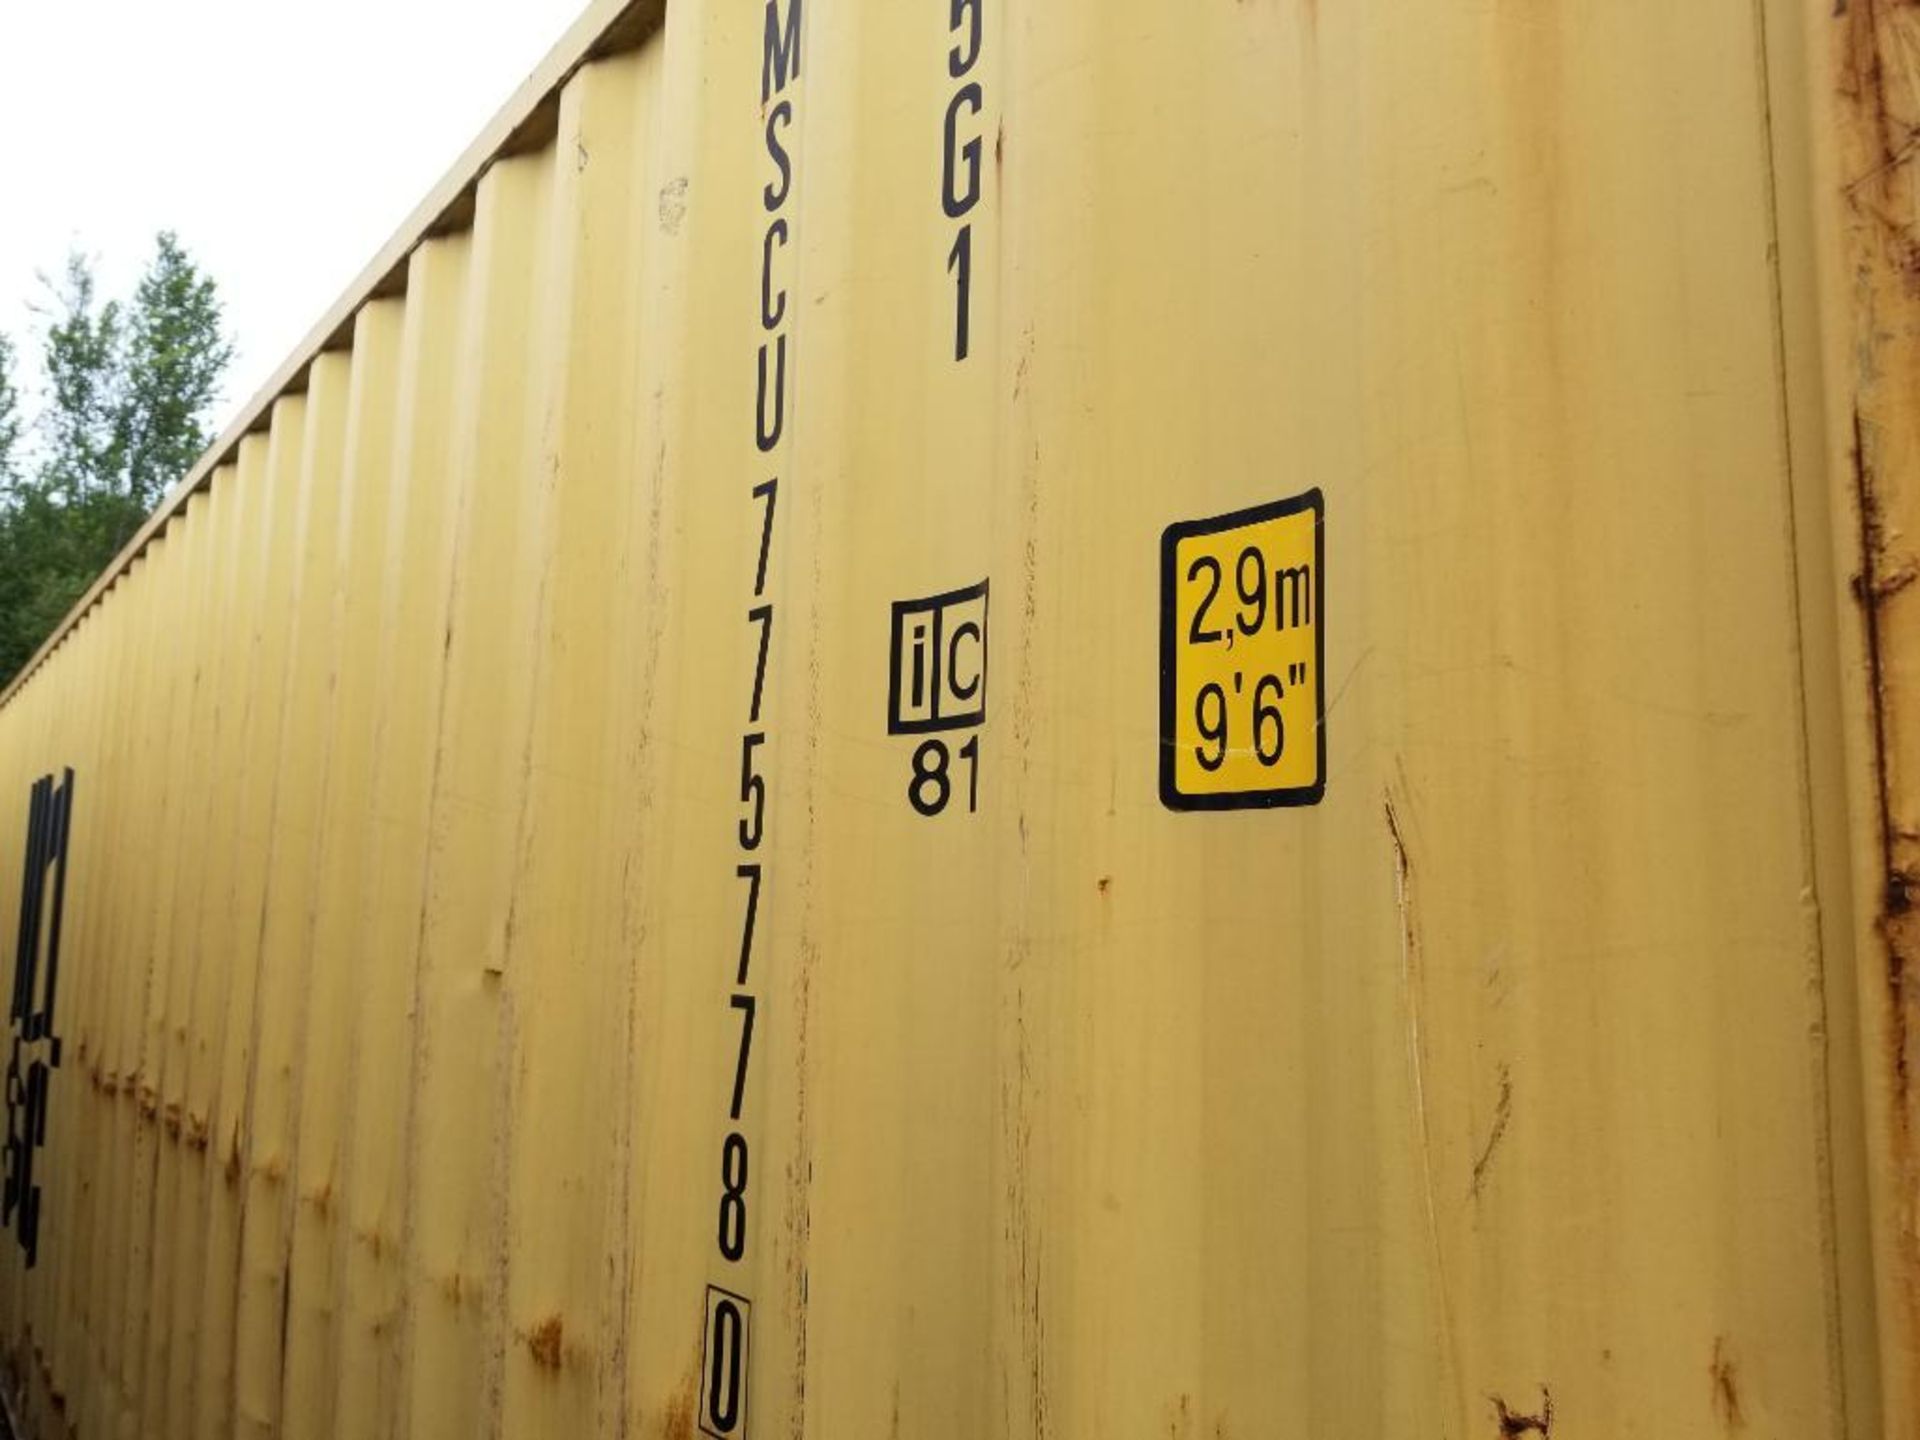 2006 Storage container. 40ft length. 9ft 6in tall. Type NL40H-181A. Max gross weight 67,200lbs. - Image 6 of 9